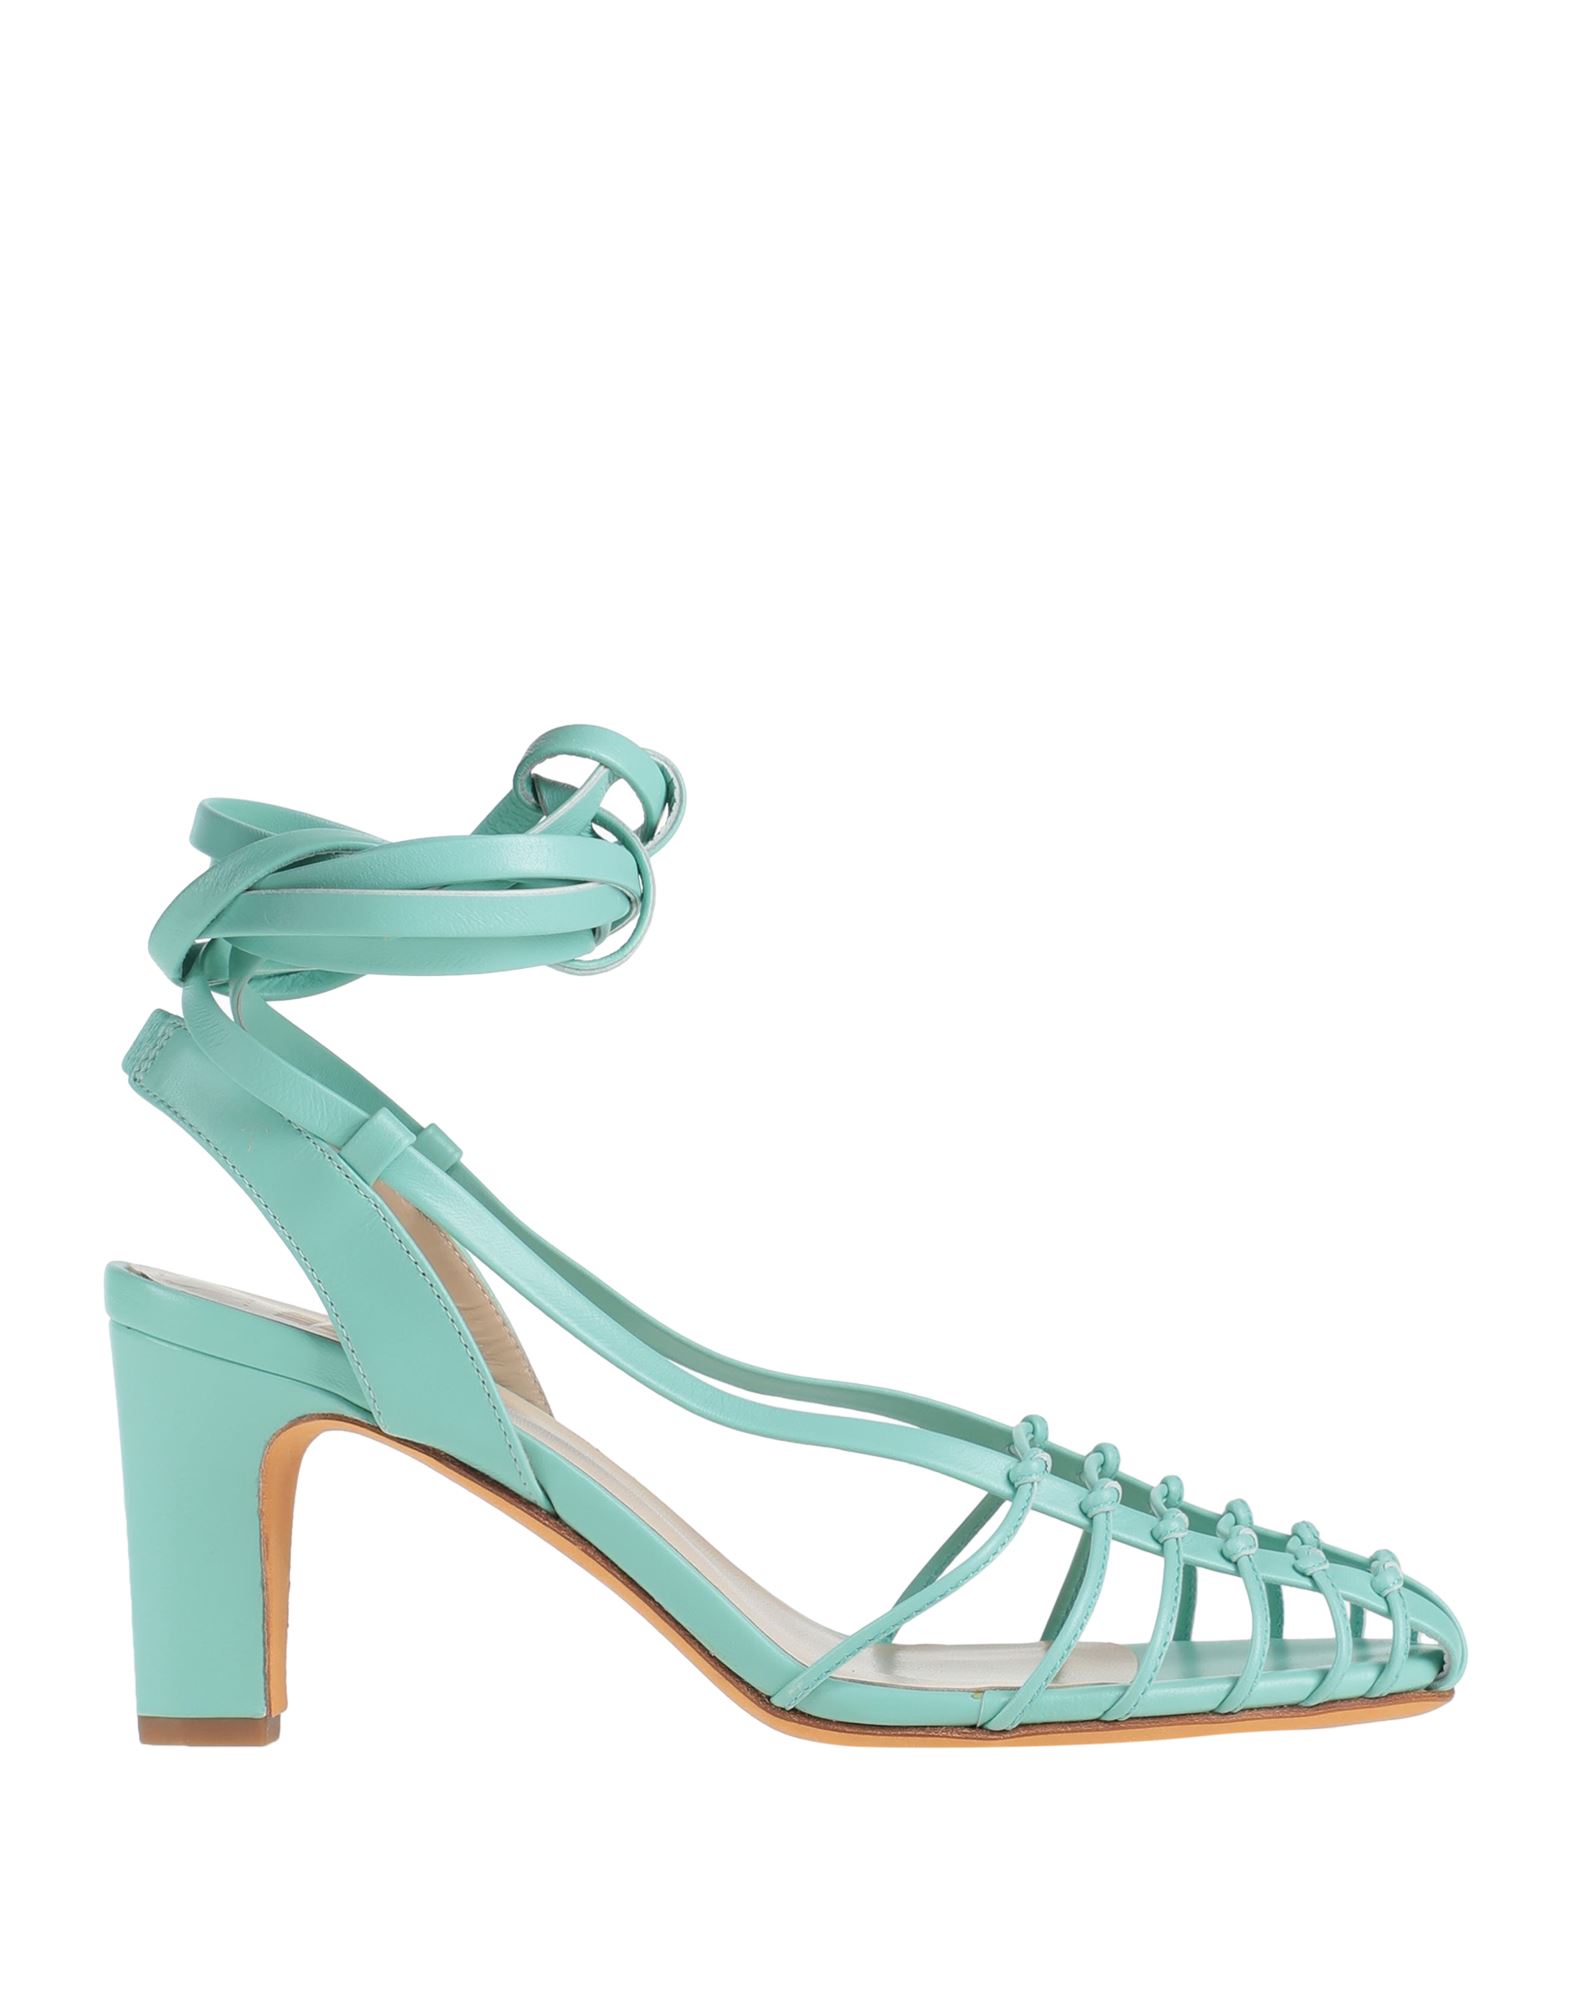 Maryam Nassir Zadeh Sandals In Turquoise